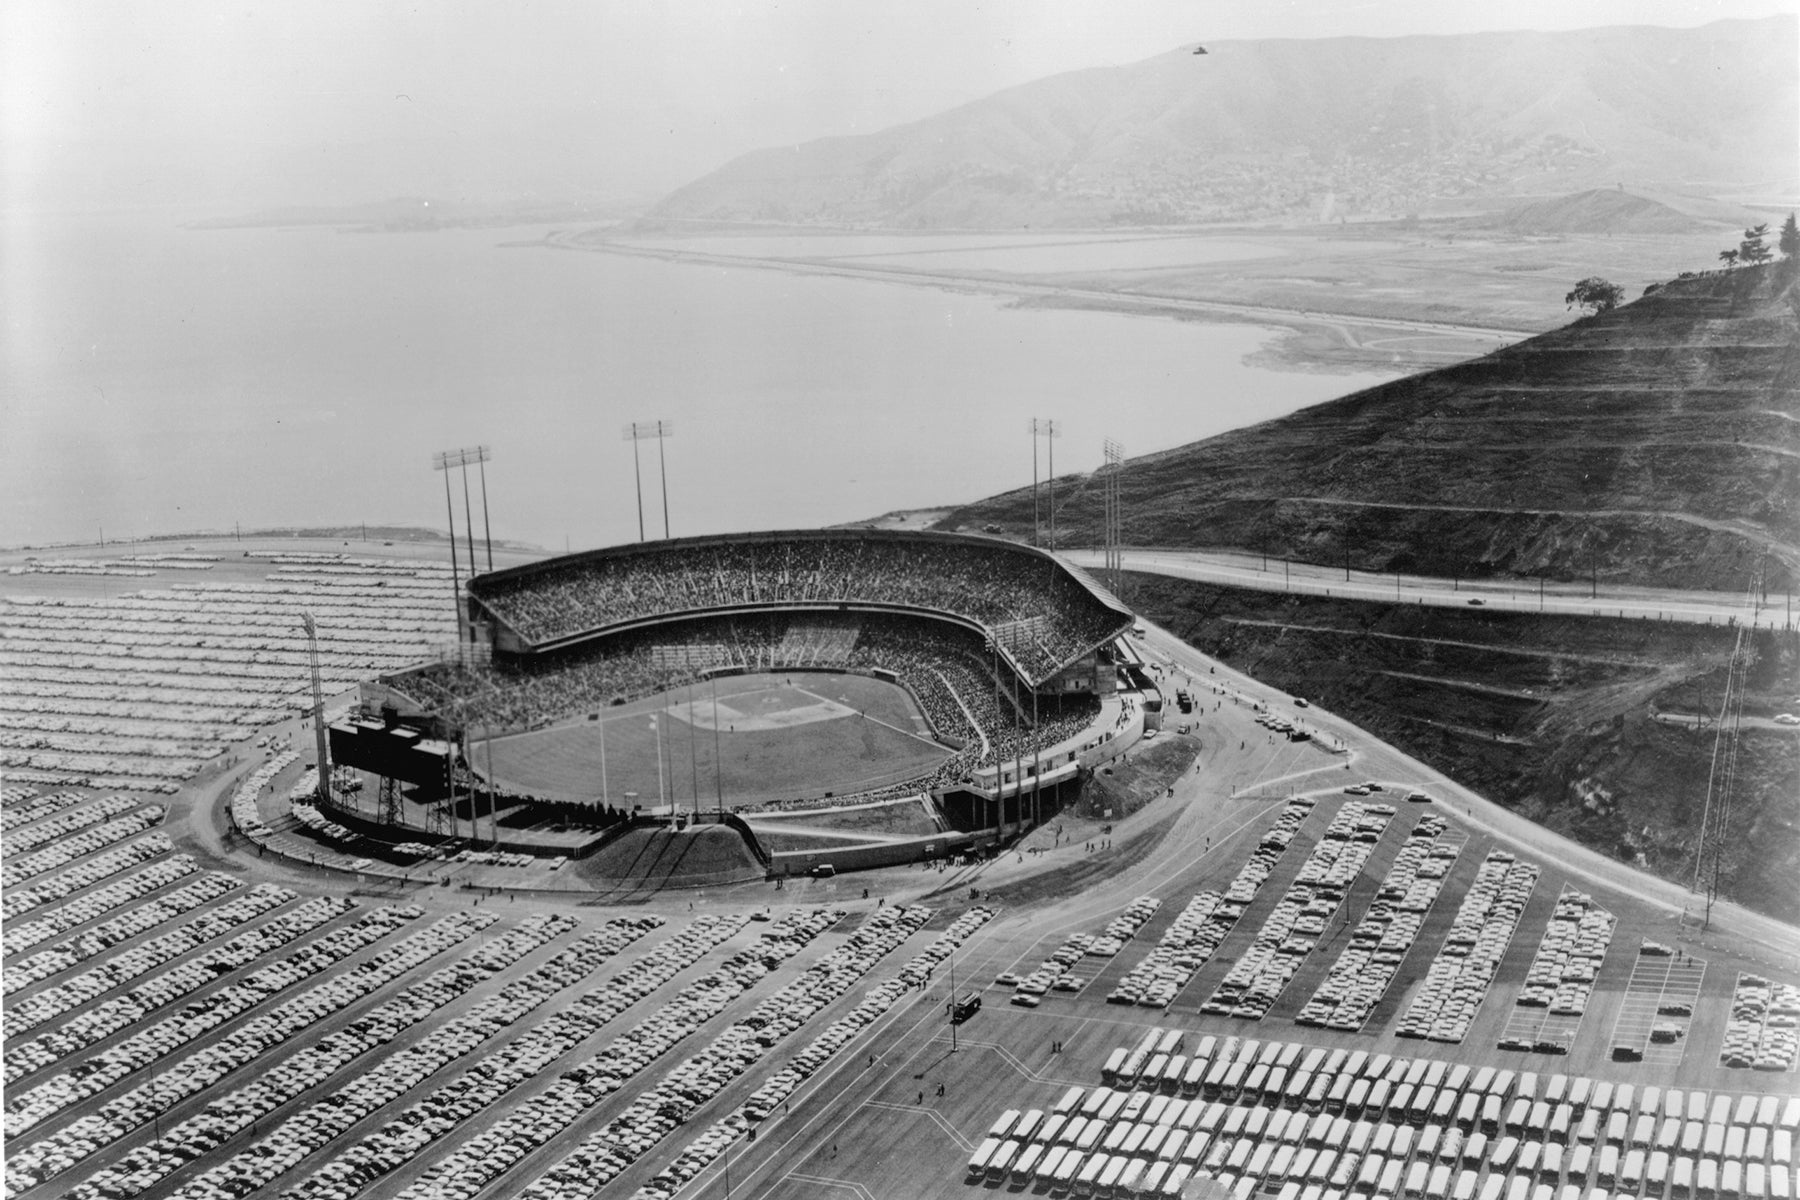 Aerial view of Candlestick Park near San Francisco Bay